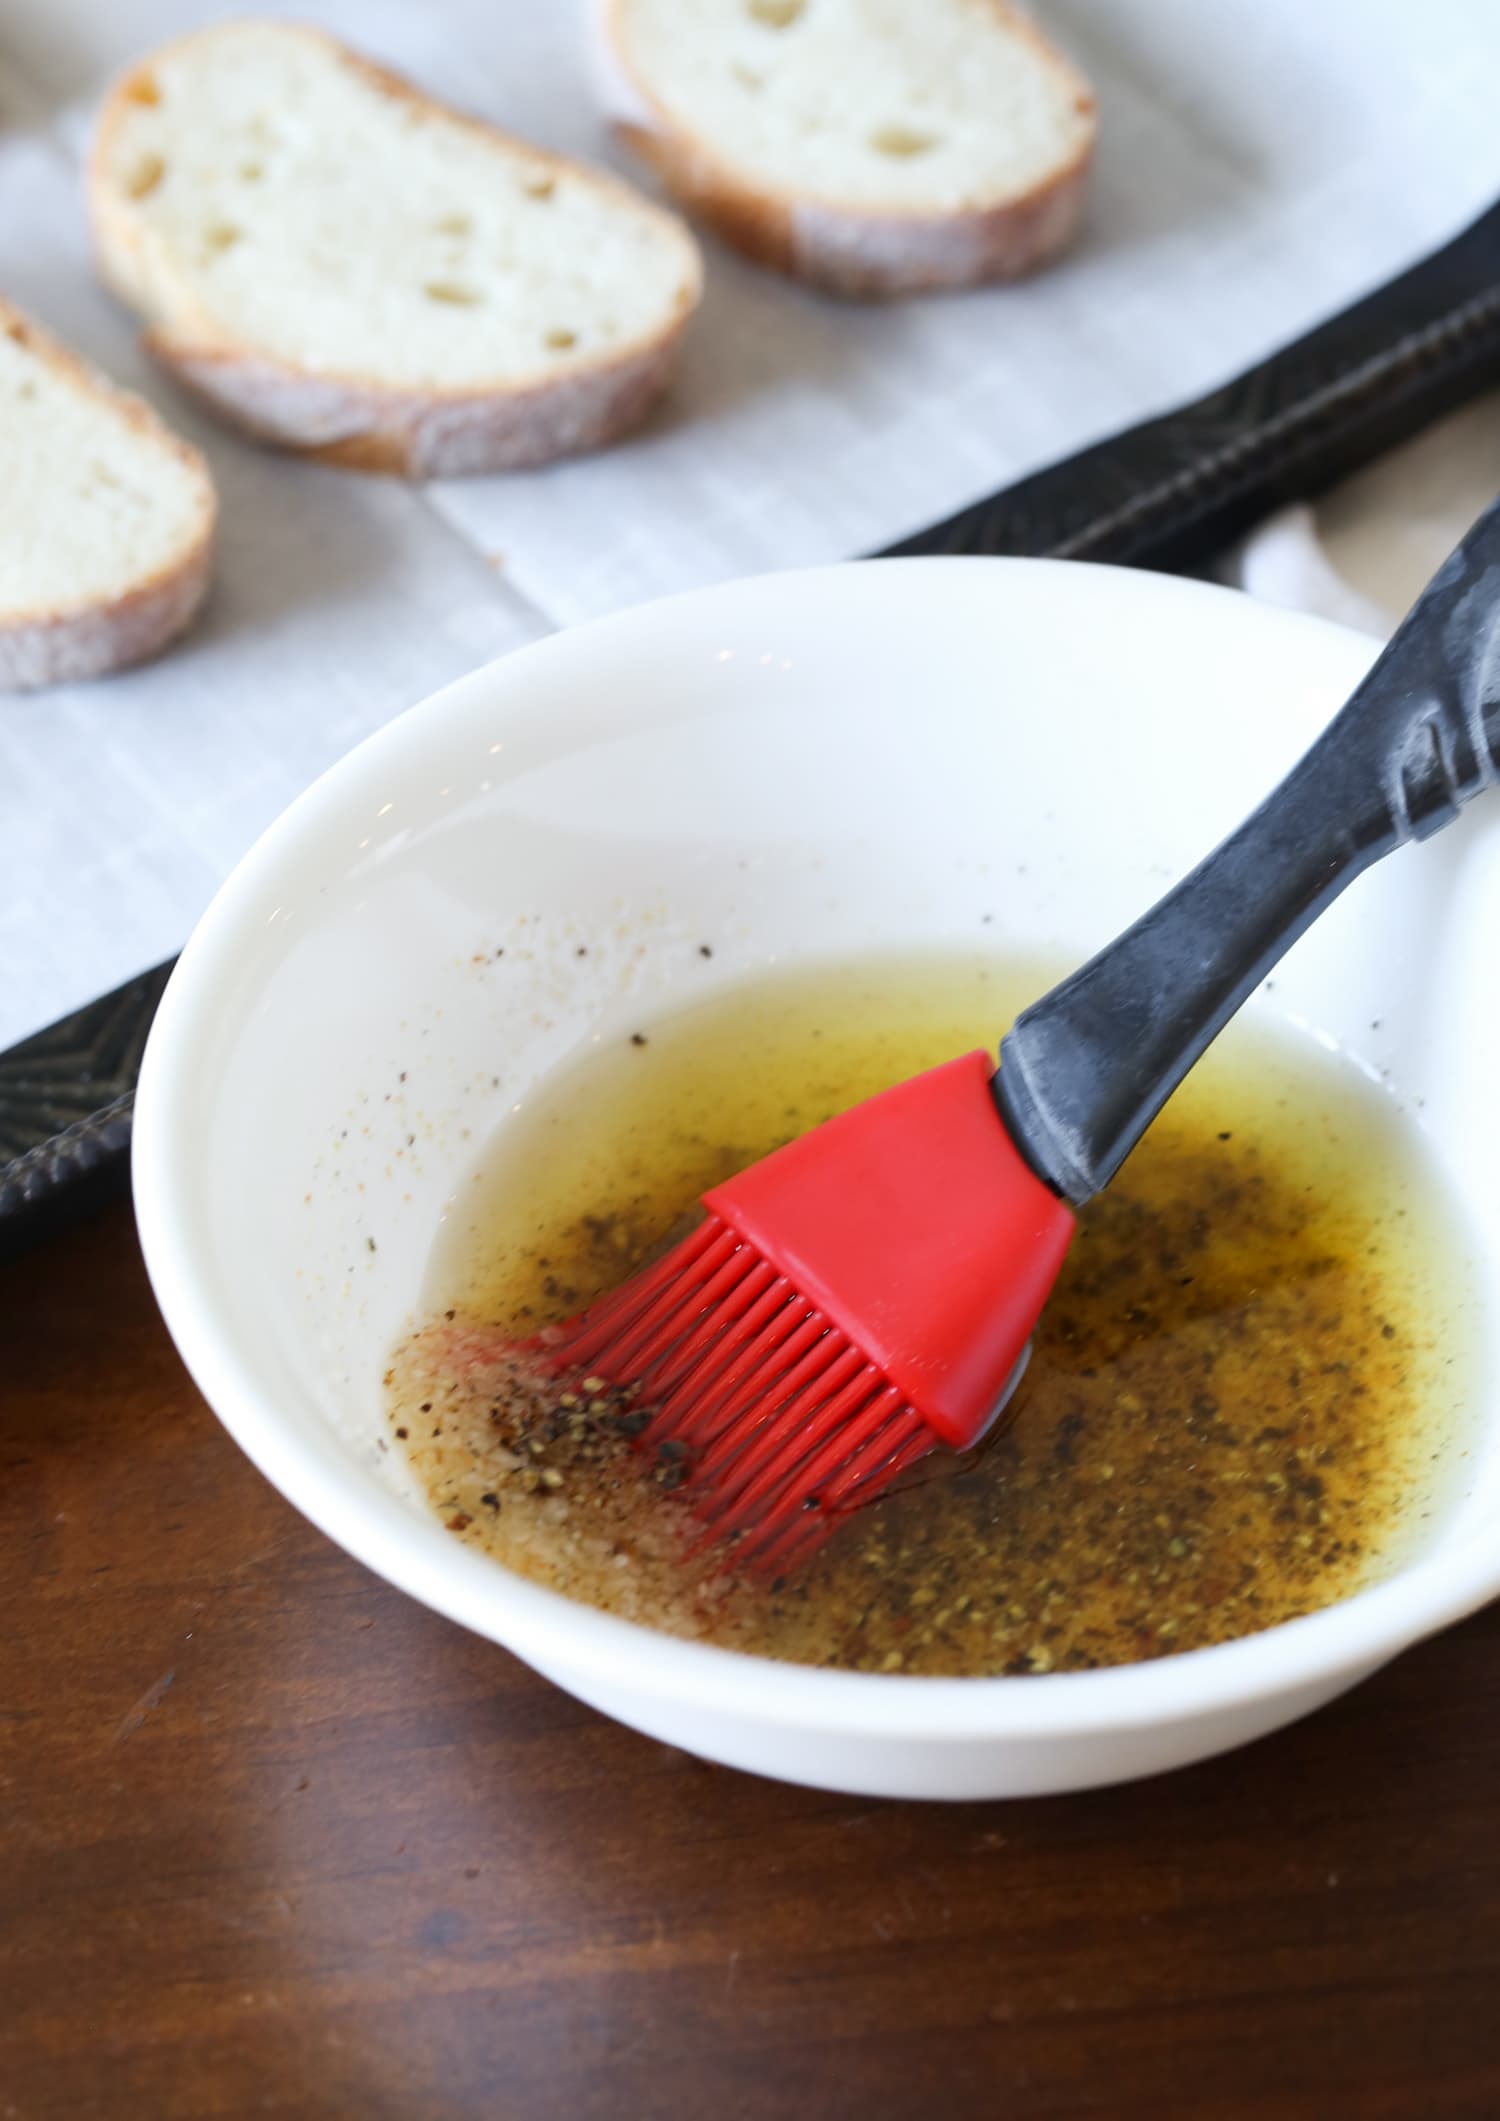 A mixture of olive oil and seasonings in a bowl with a pastry brush.